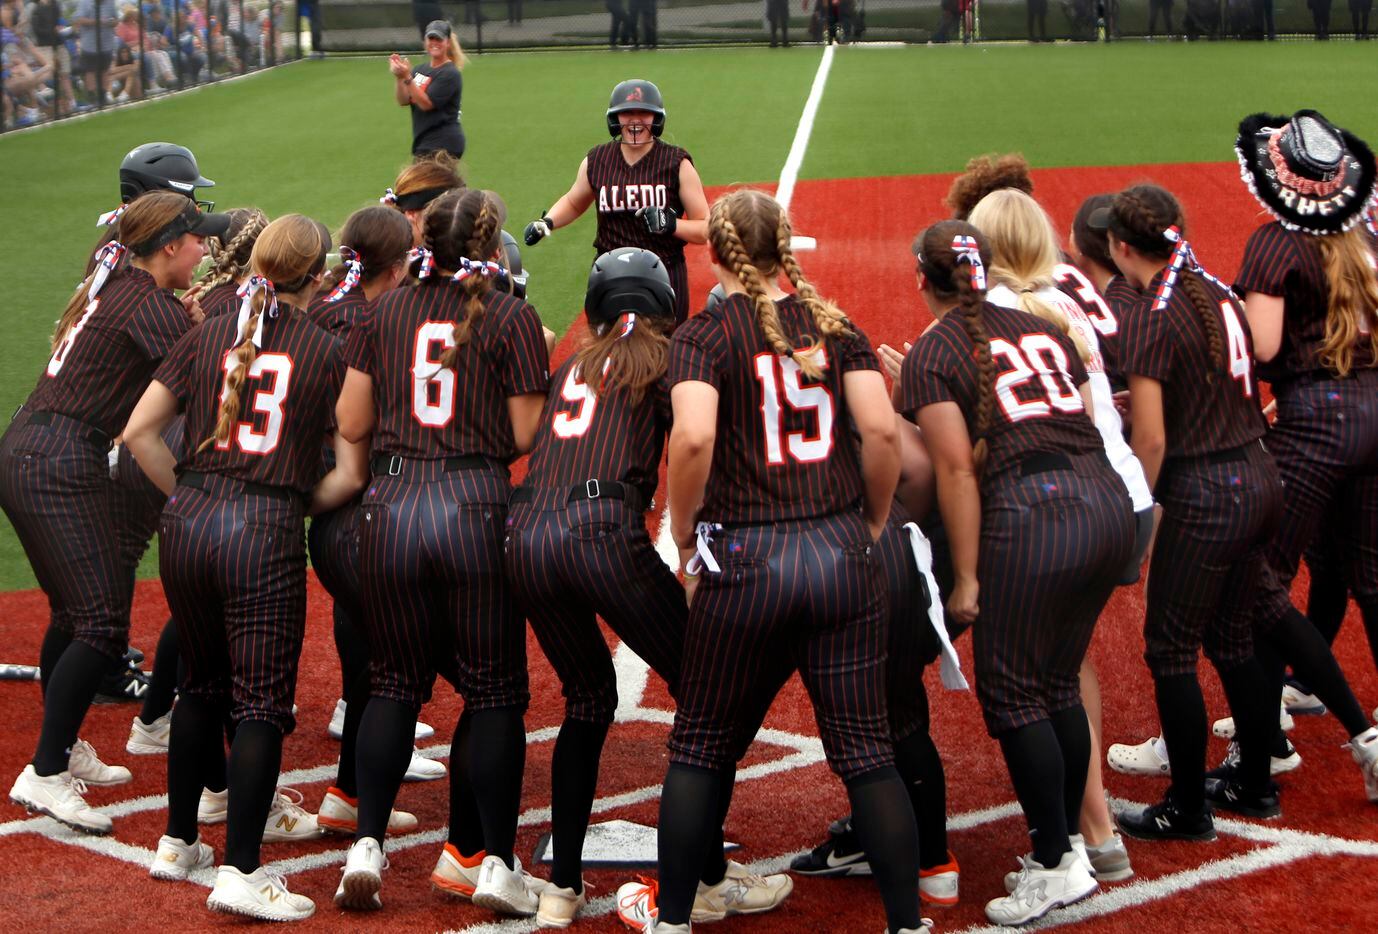 Aledo outfielder Marissa Powell (11) received quite the warm welcome from teammates gathered at home plate after swinging for the fences and accomplishing her goal with a 3-run homer during the top of the 4th inning of play against Georgetown. The two teams played their UIL 5A state softball semifinal game at Leander Glenn High School in Leander on June 4, 2021. (Steve Hamm/ Special Contributor)